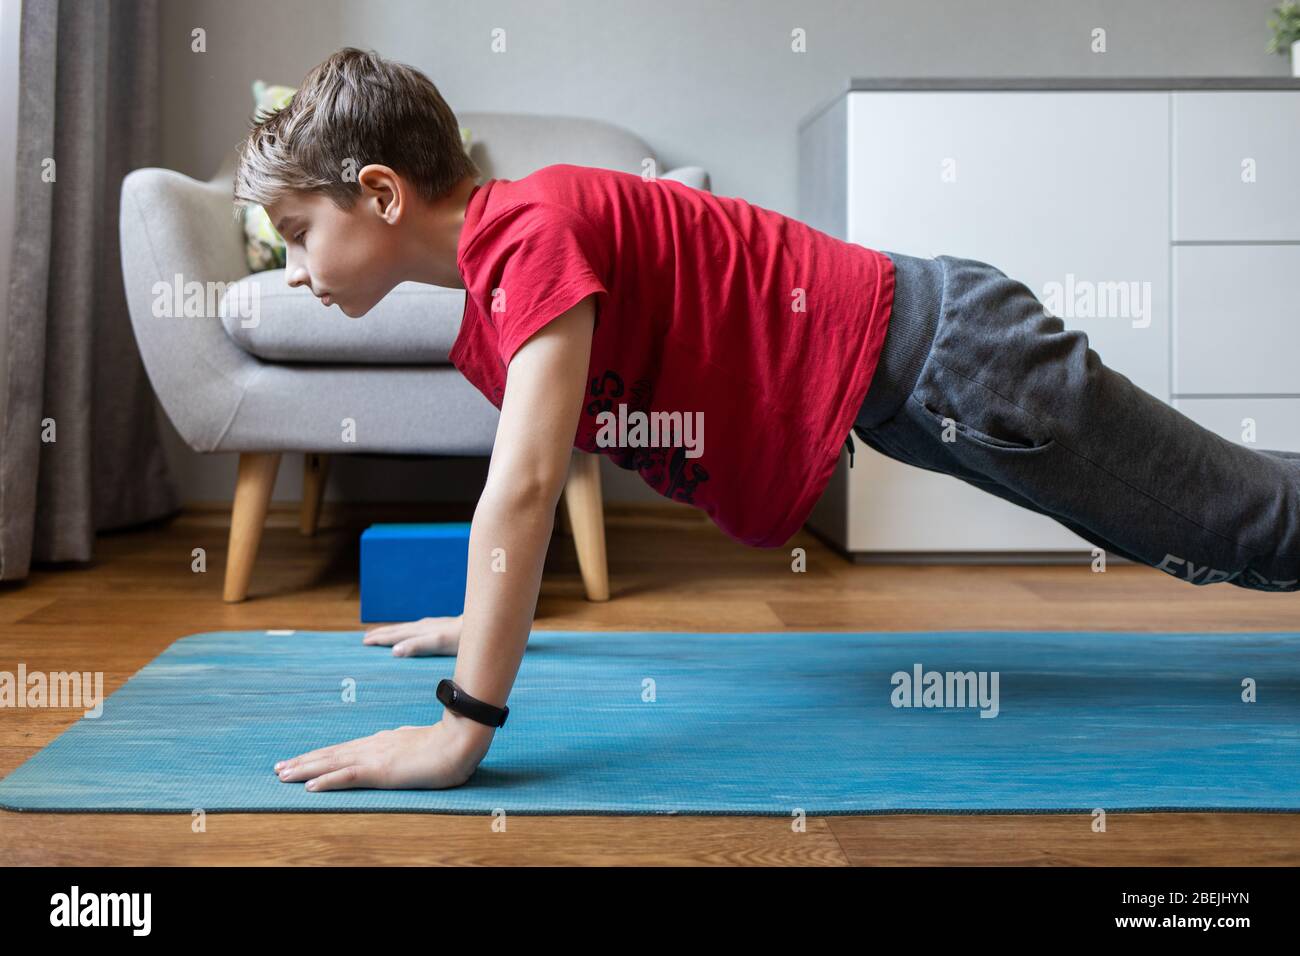 Small boy on yoga mat at home holding plank pose. Child physical activity at home on quarantine Stock Photo